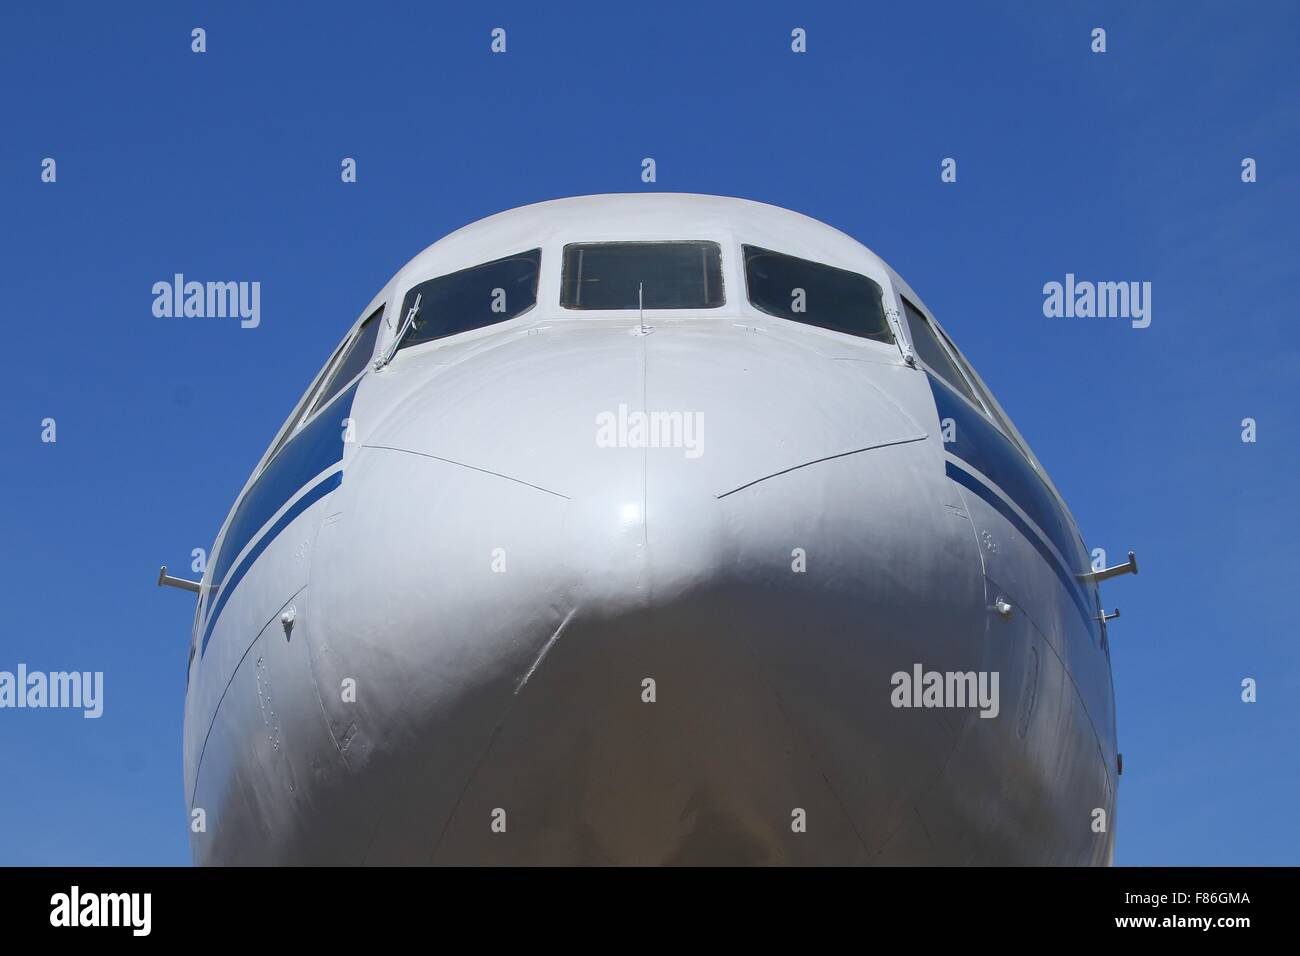 The fuselage of the aircraft Stock Photo